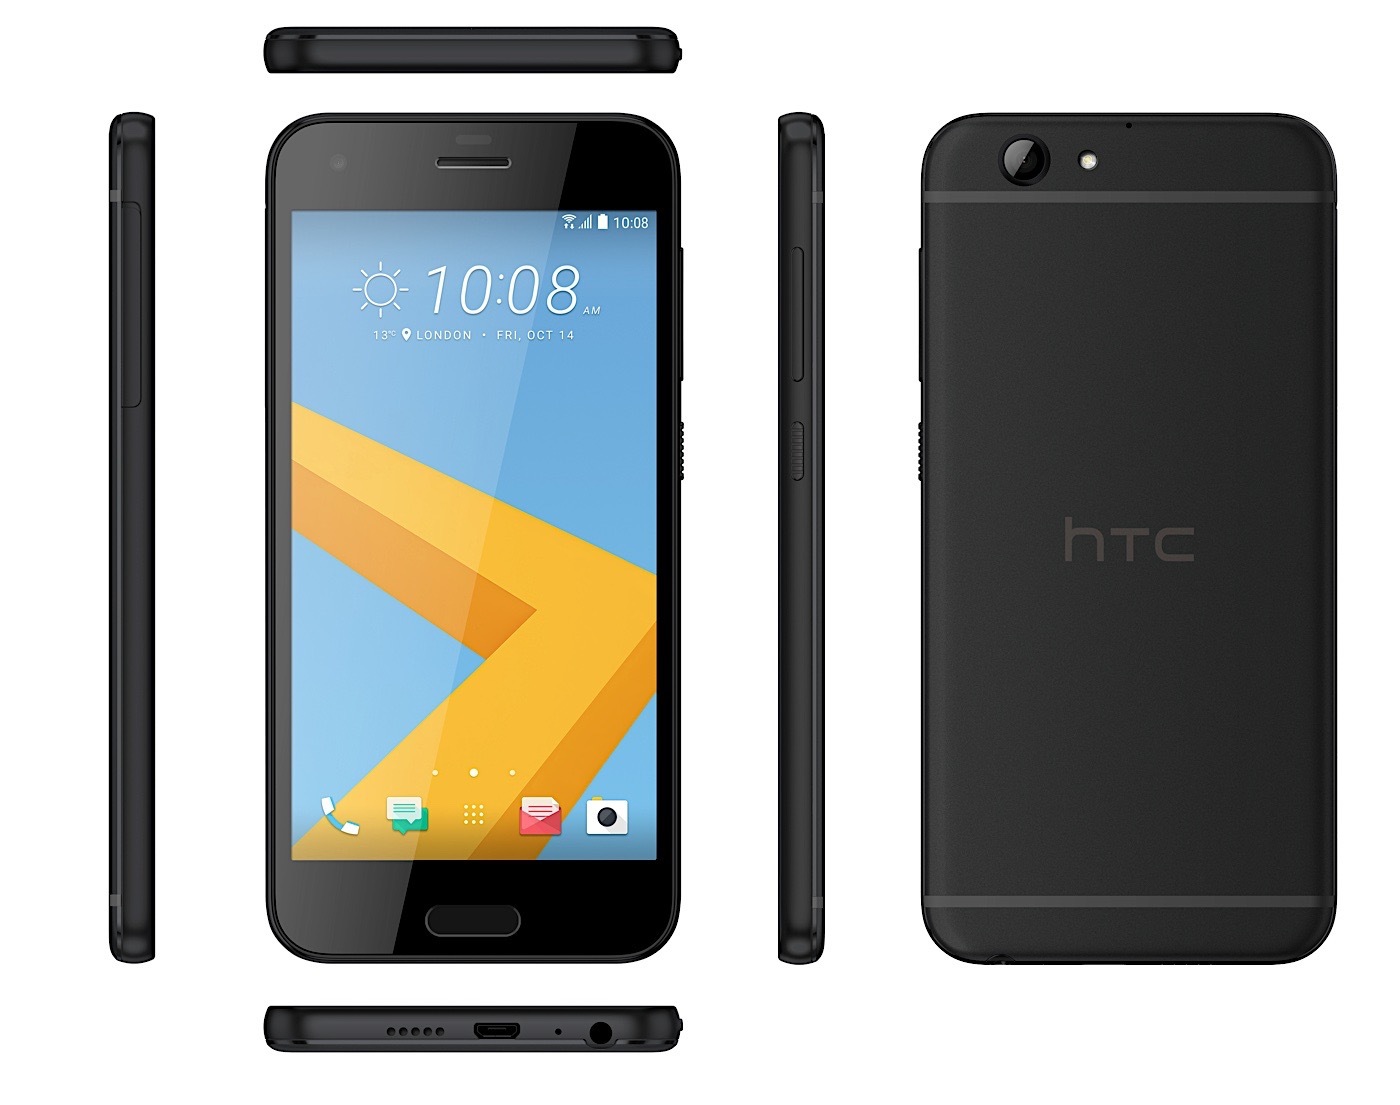 E36 - HTC One A9s - Handset - Image - Global